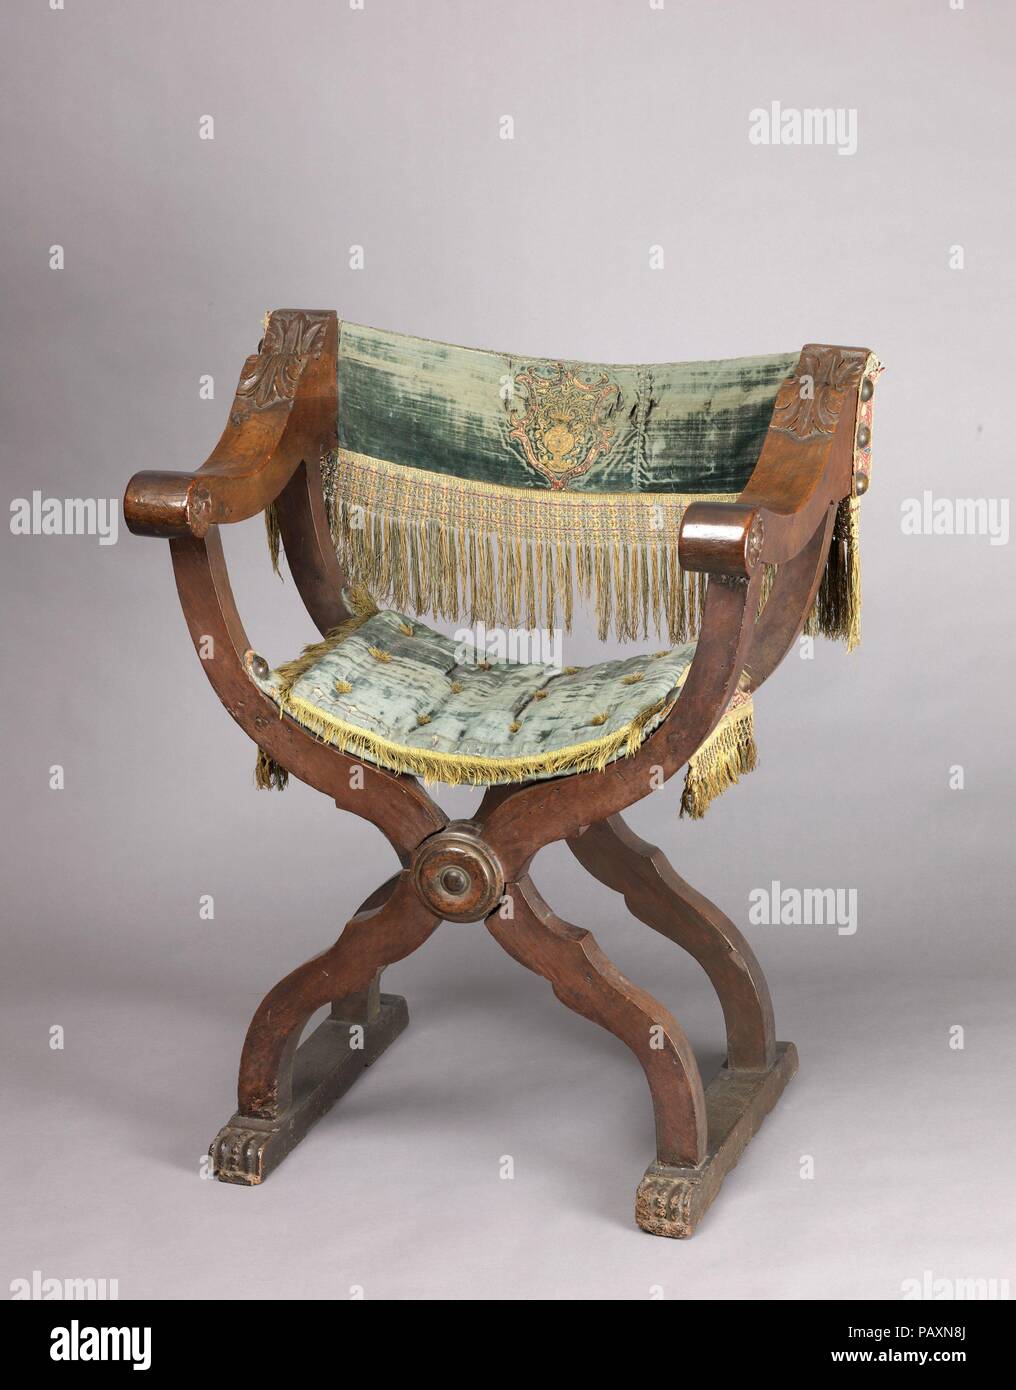 Hip-joint armchair (Dantesca type, associated with 1975.1.1970 a,b). Culture: Italian. Dimensions: H. 91.5 cm, W. 74.5 cm, D. 49 cm.  Back: 35 x 76 cm.; Seat 45 x 52 cm.. Date: 15th or 16th century (textiles); 16th century (chair). Museum: Metropolitan Museum of Art, New York, USA. Stock Photo